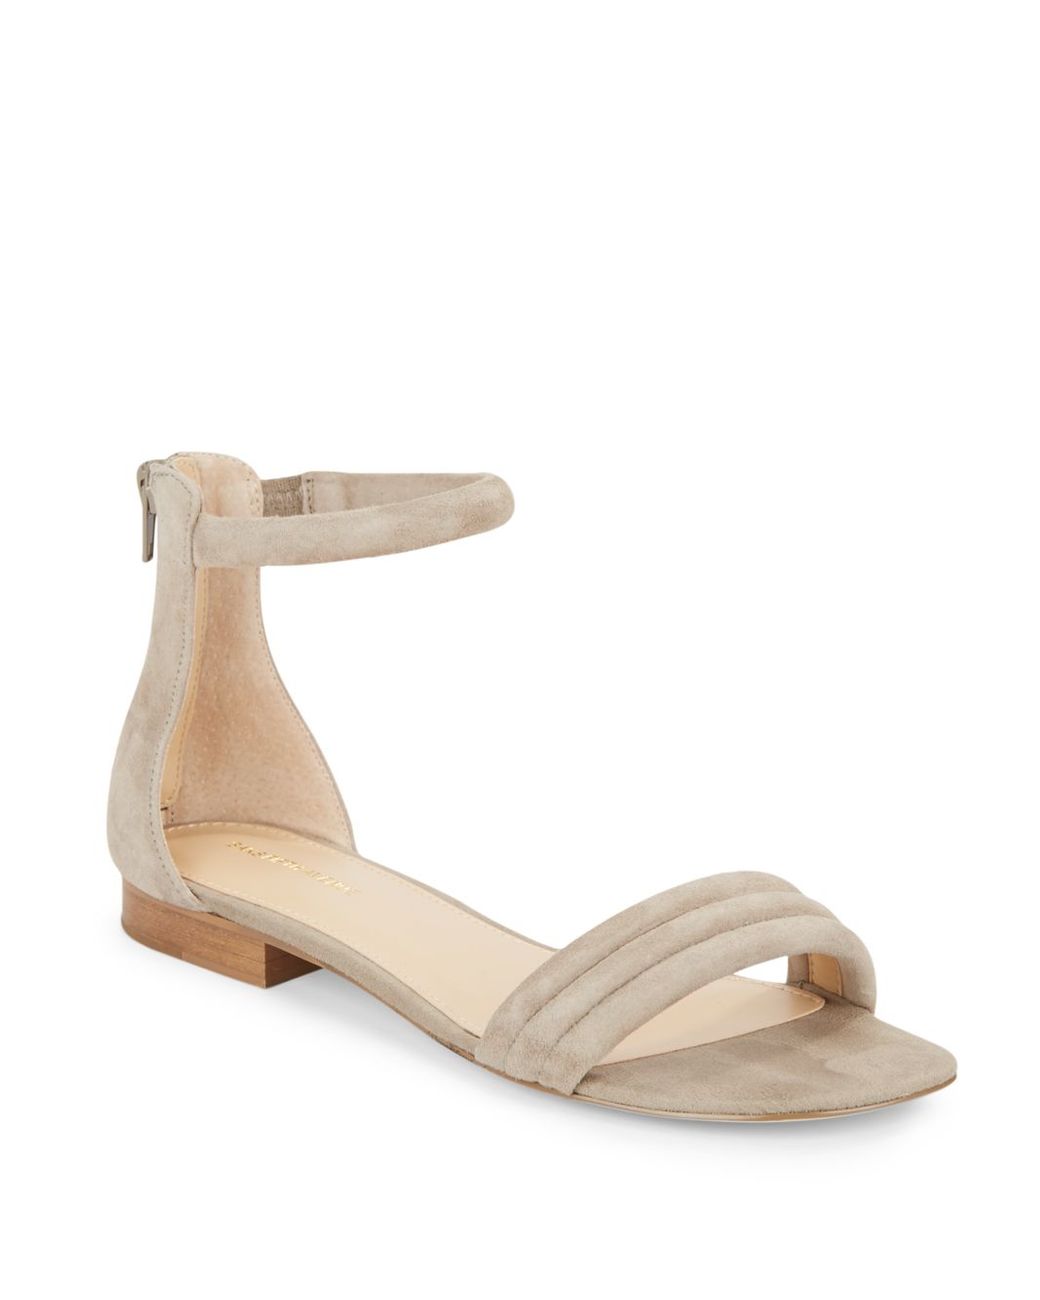 BA&SH Suede sandals | THE OUTNET